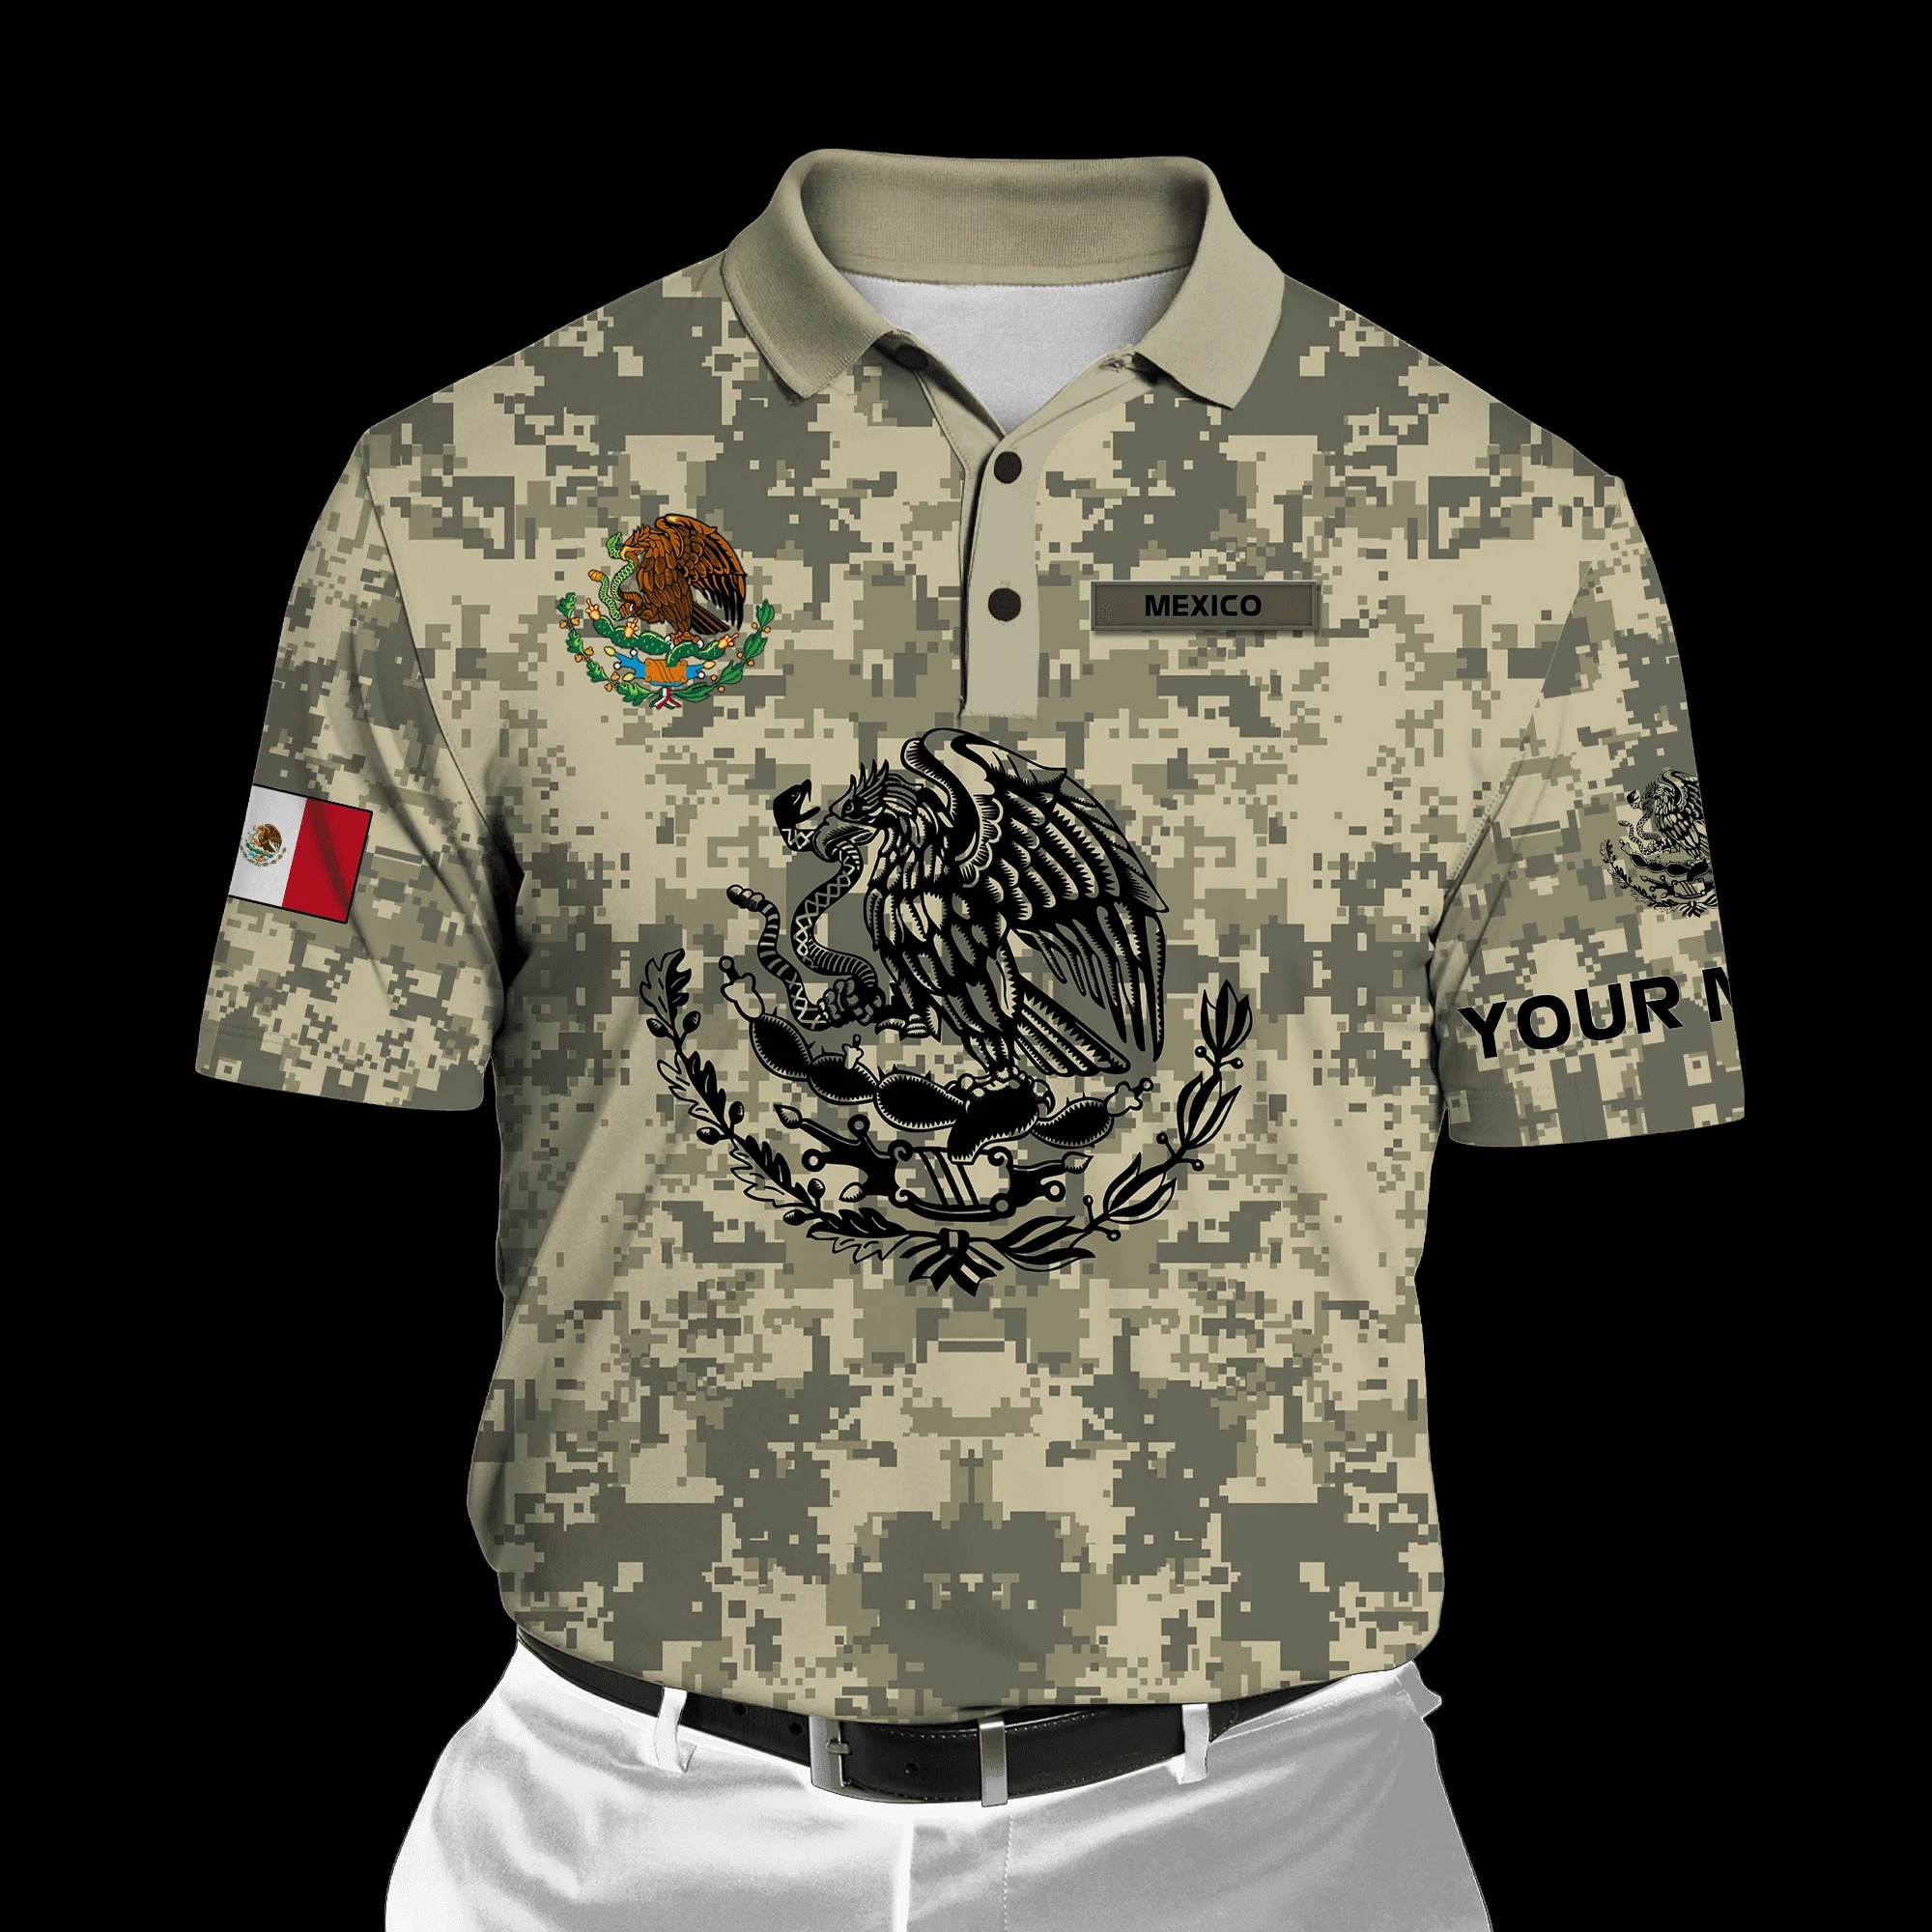 Mexican Army Mexican flag custom personalized Polo shirt – LIMITED EDITION